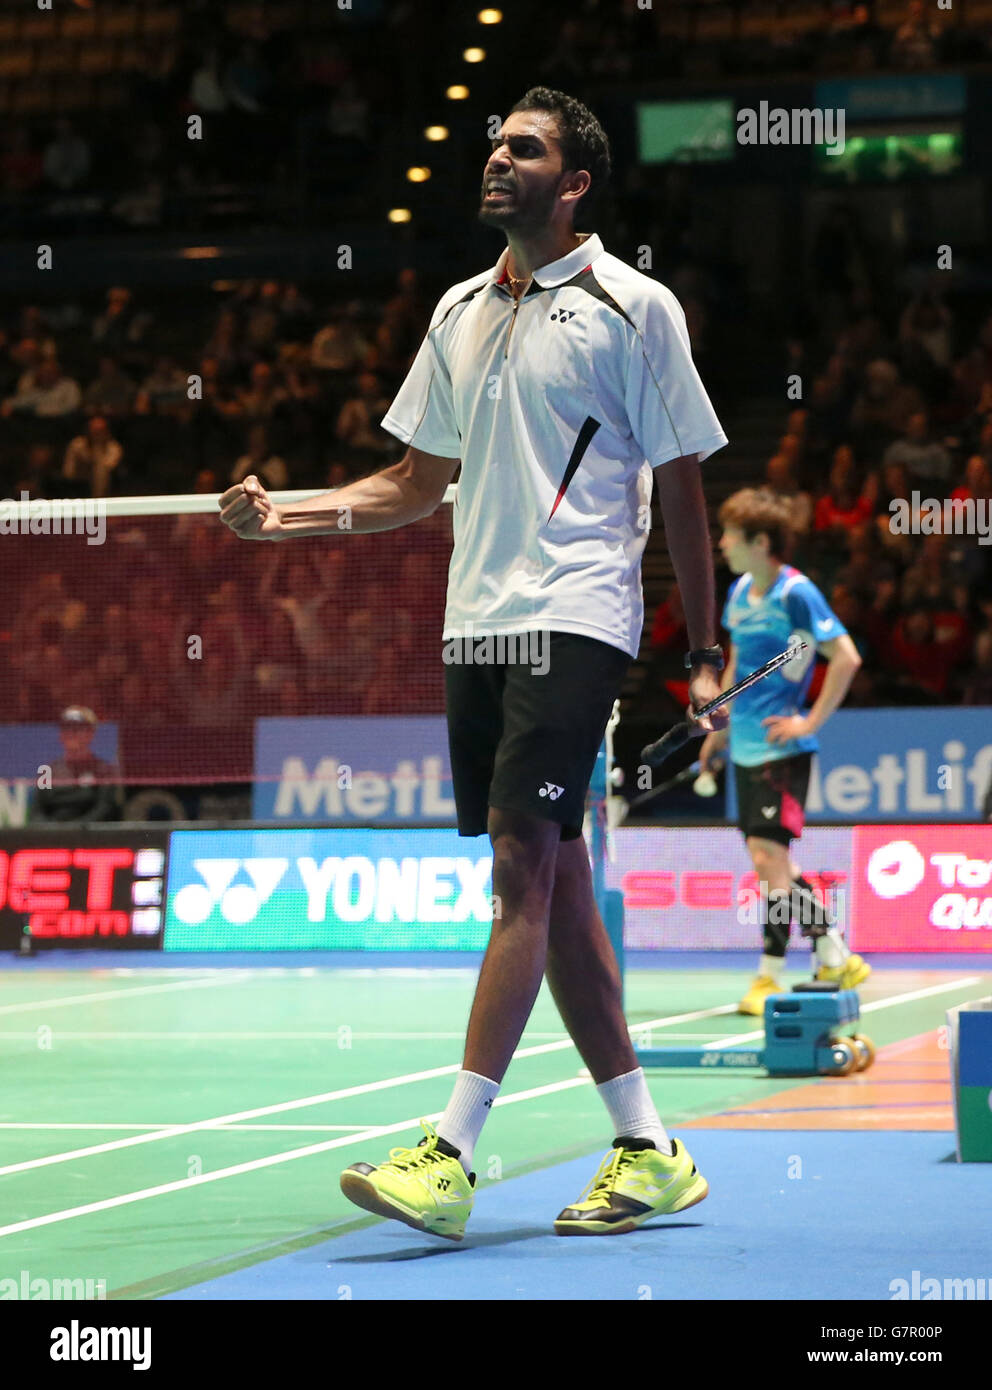 Badminton - 2015 Yonex All England Badminton Championships - Day One - National Indoor Arena. England's Rajiv Ouseph celebrates winning his first round singles match Stock Photo